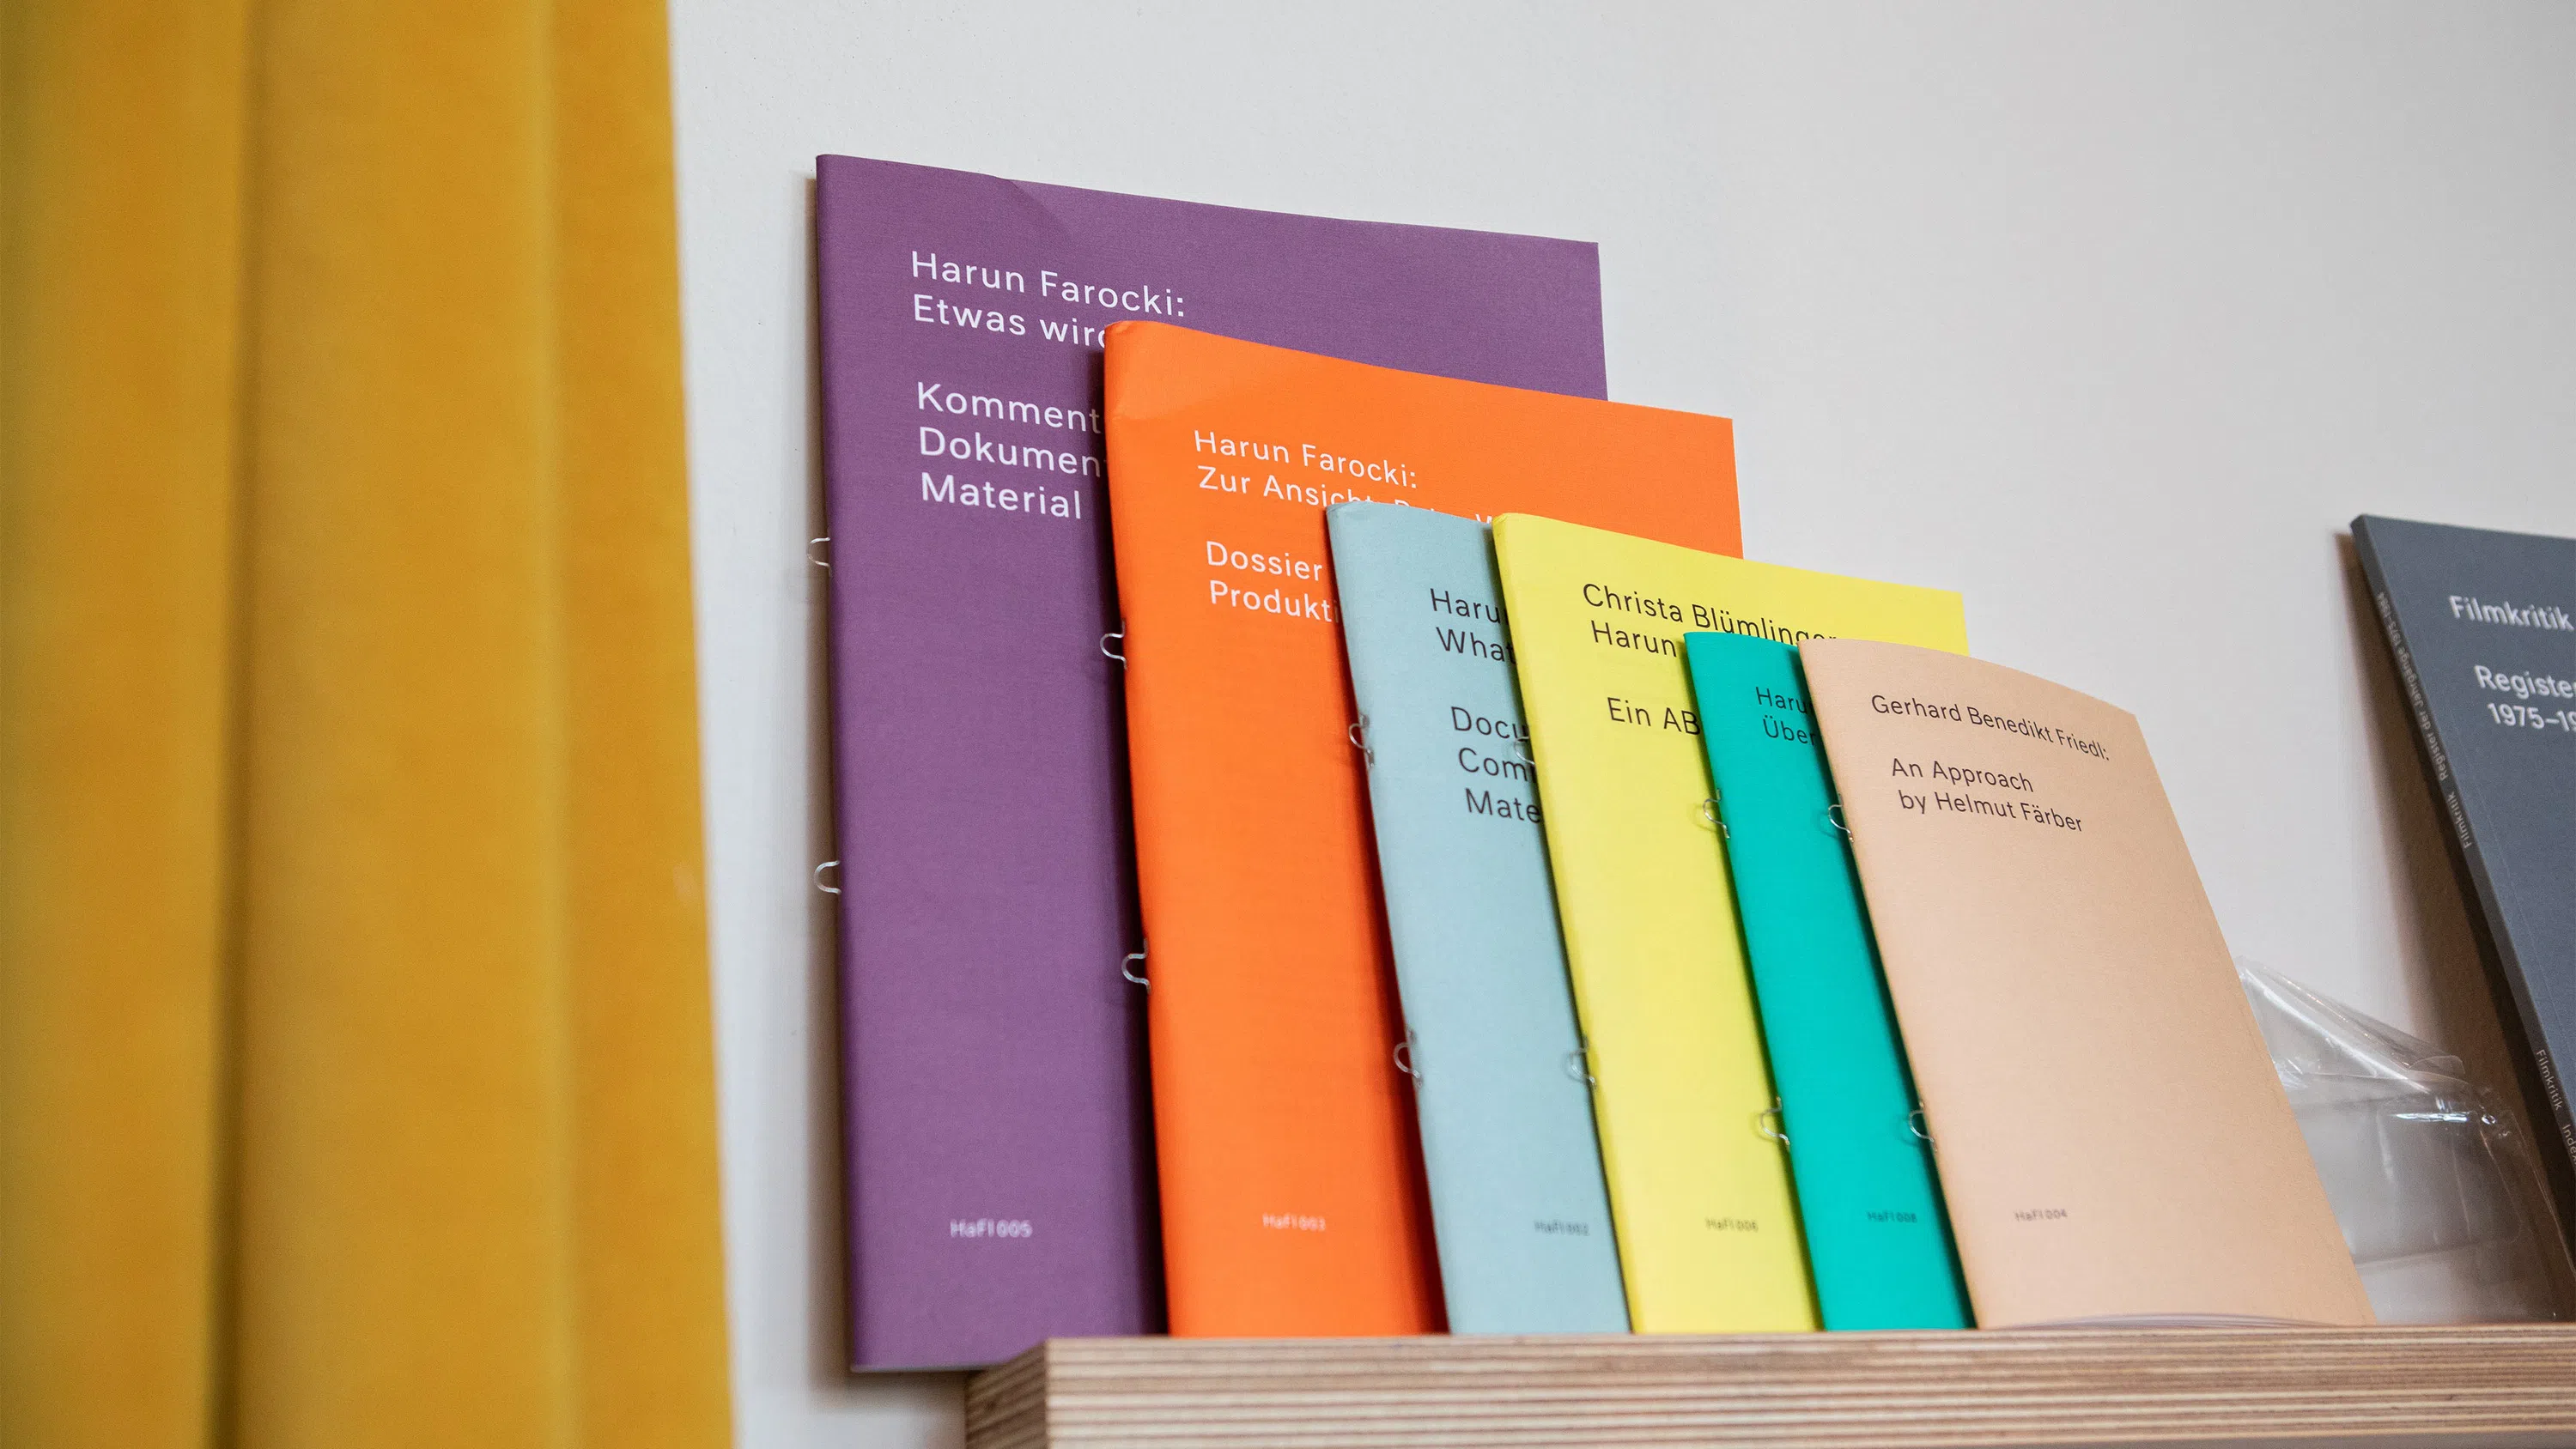 A group of six, colorful books arranged by size on a wooden shelf.